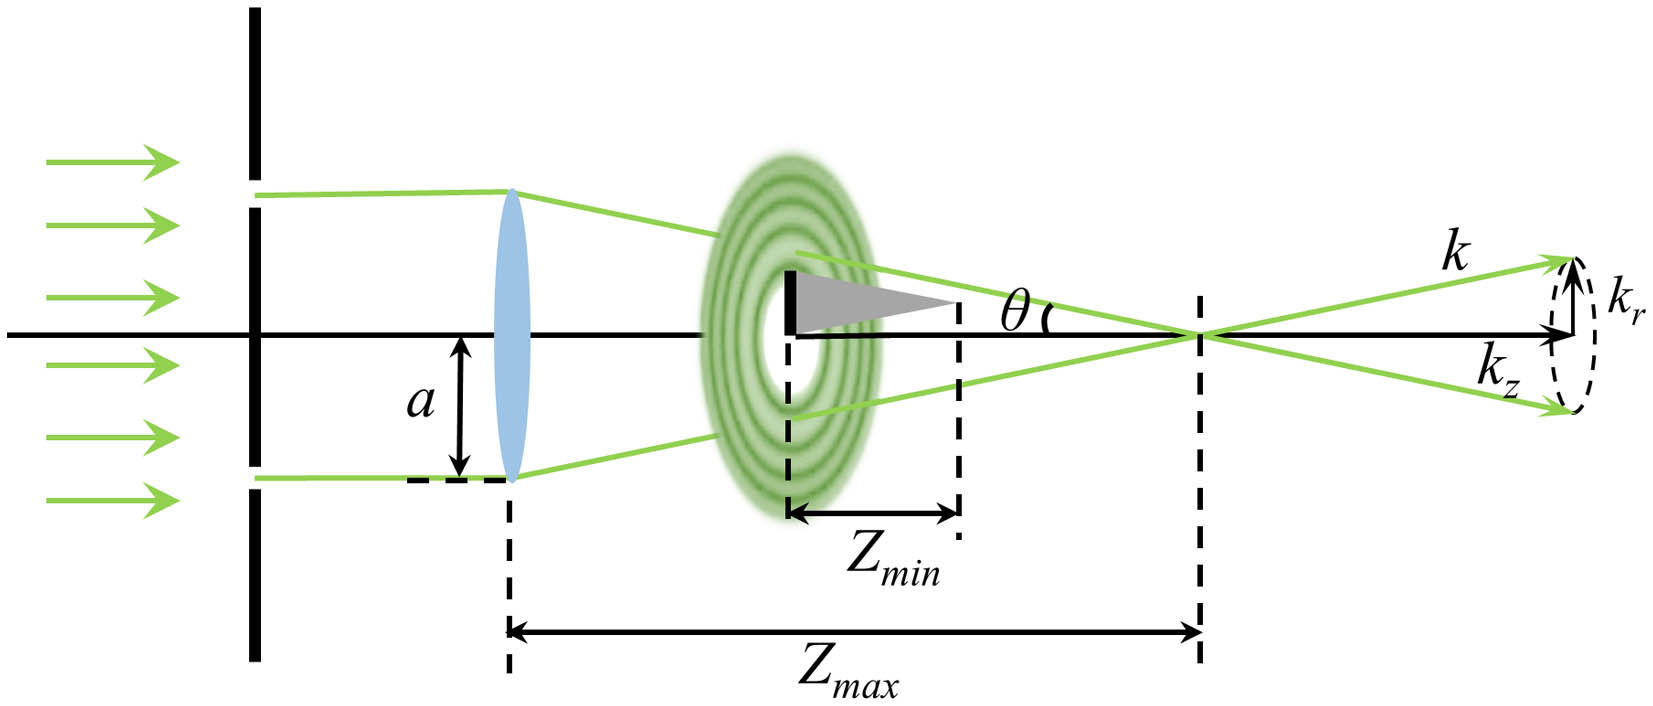 Self-healing mechanism of the conical wave-fields.